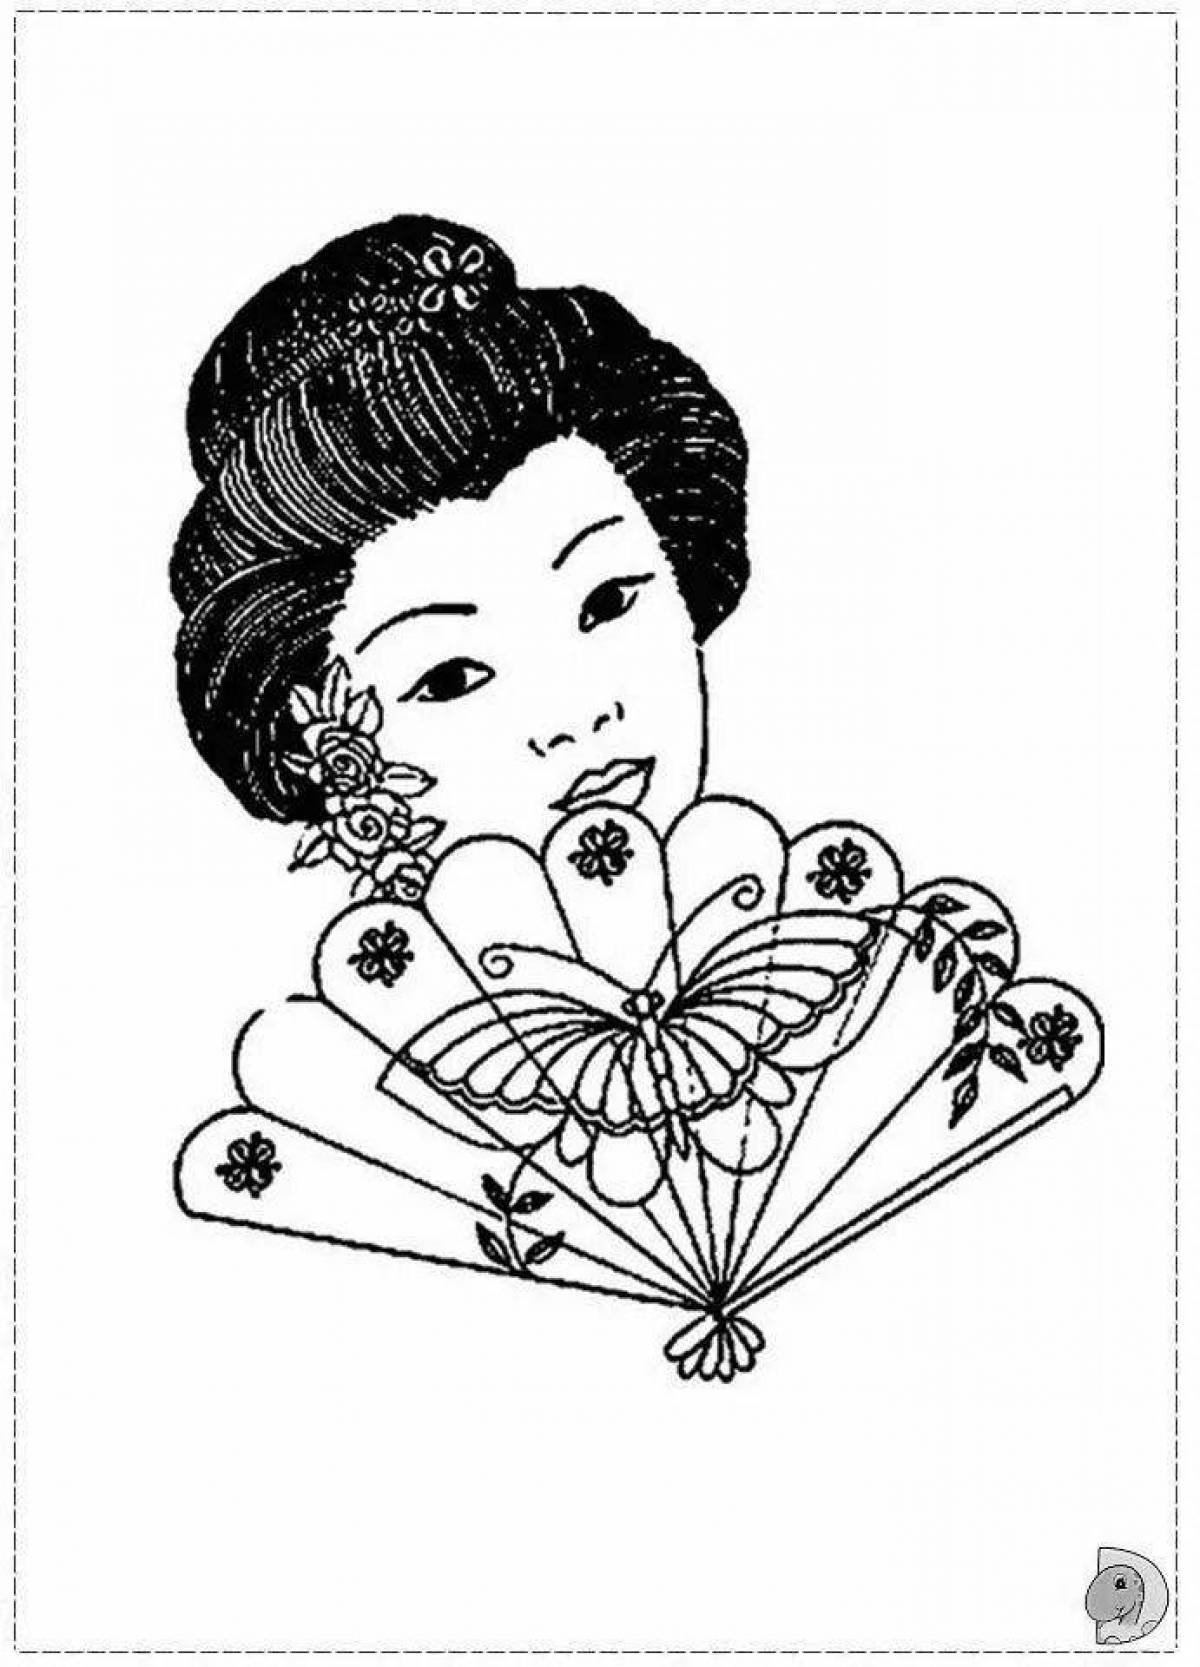 Intriguing Japanese coloring book